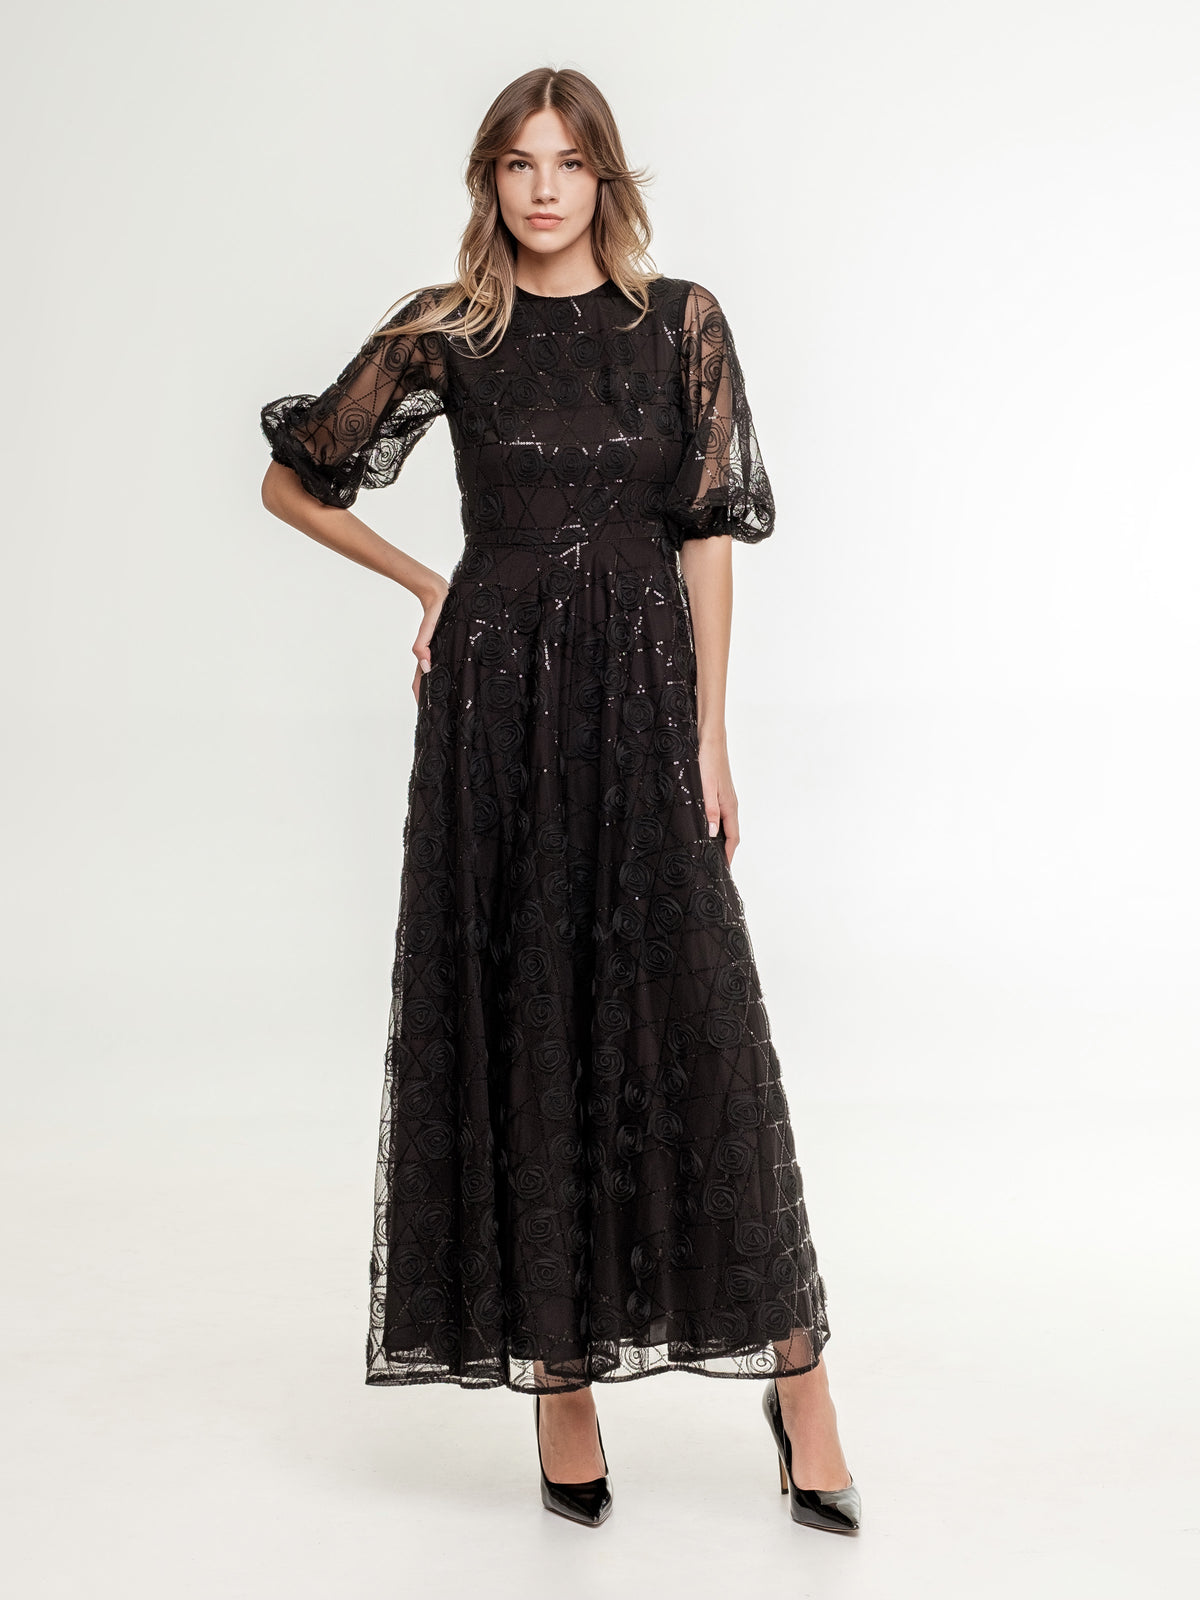 Luxurious_black_lace_dress_with_sequins_wide_skirt_transparent_medium_long_sleeves